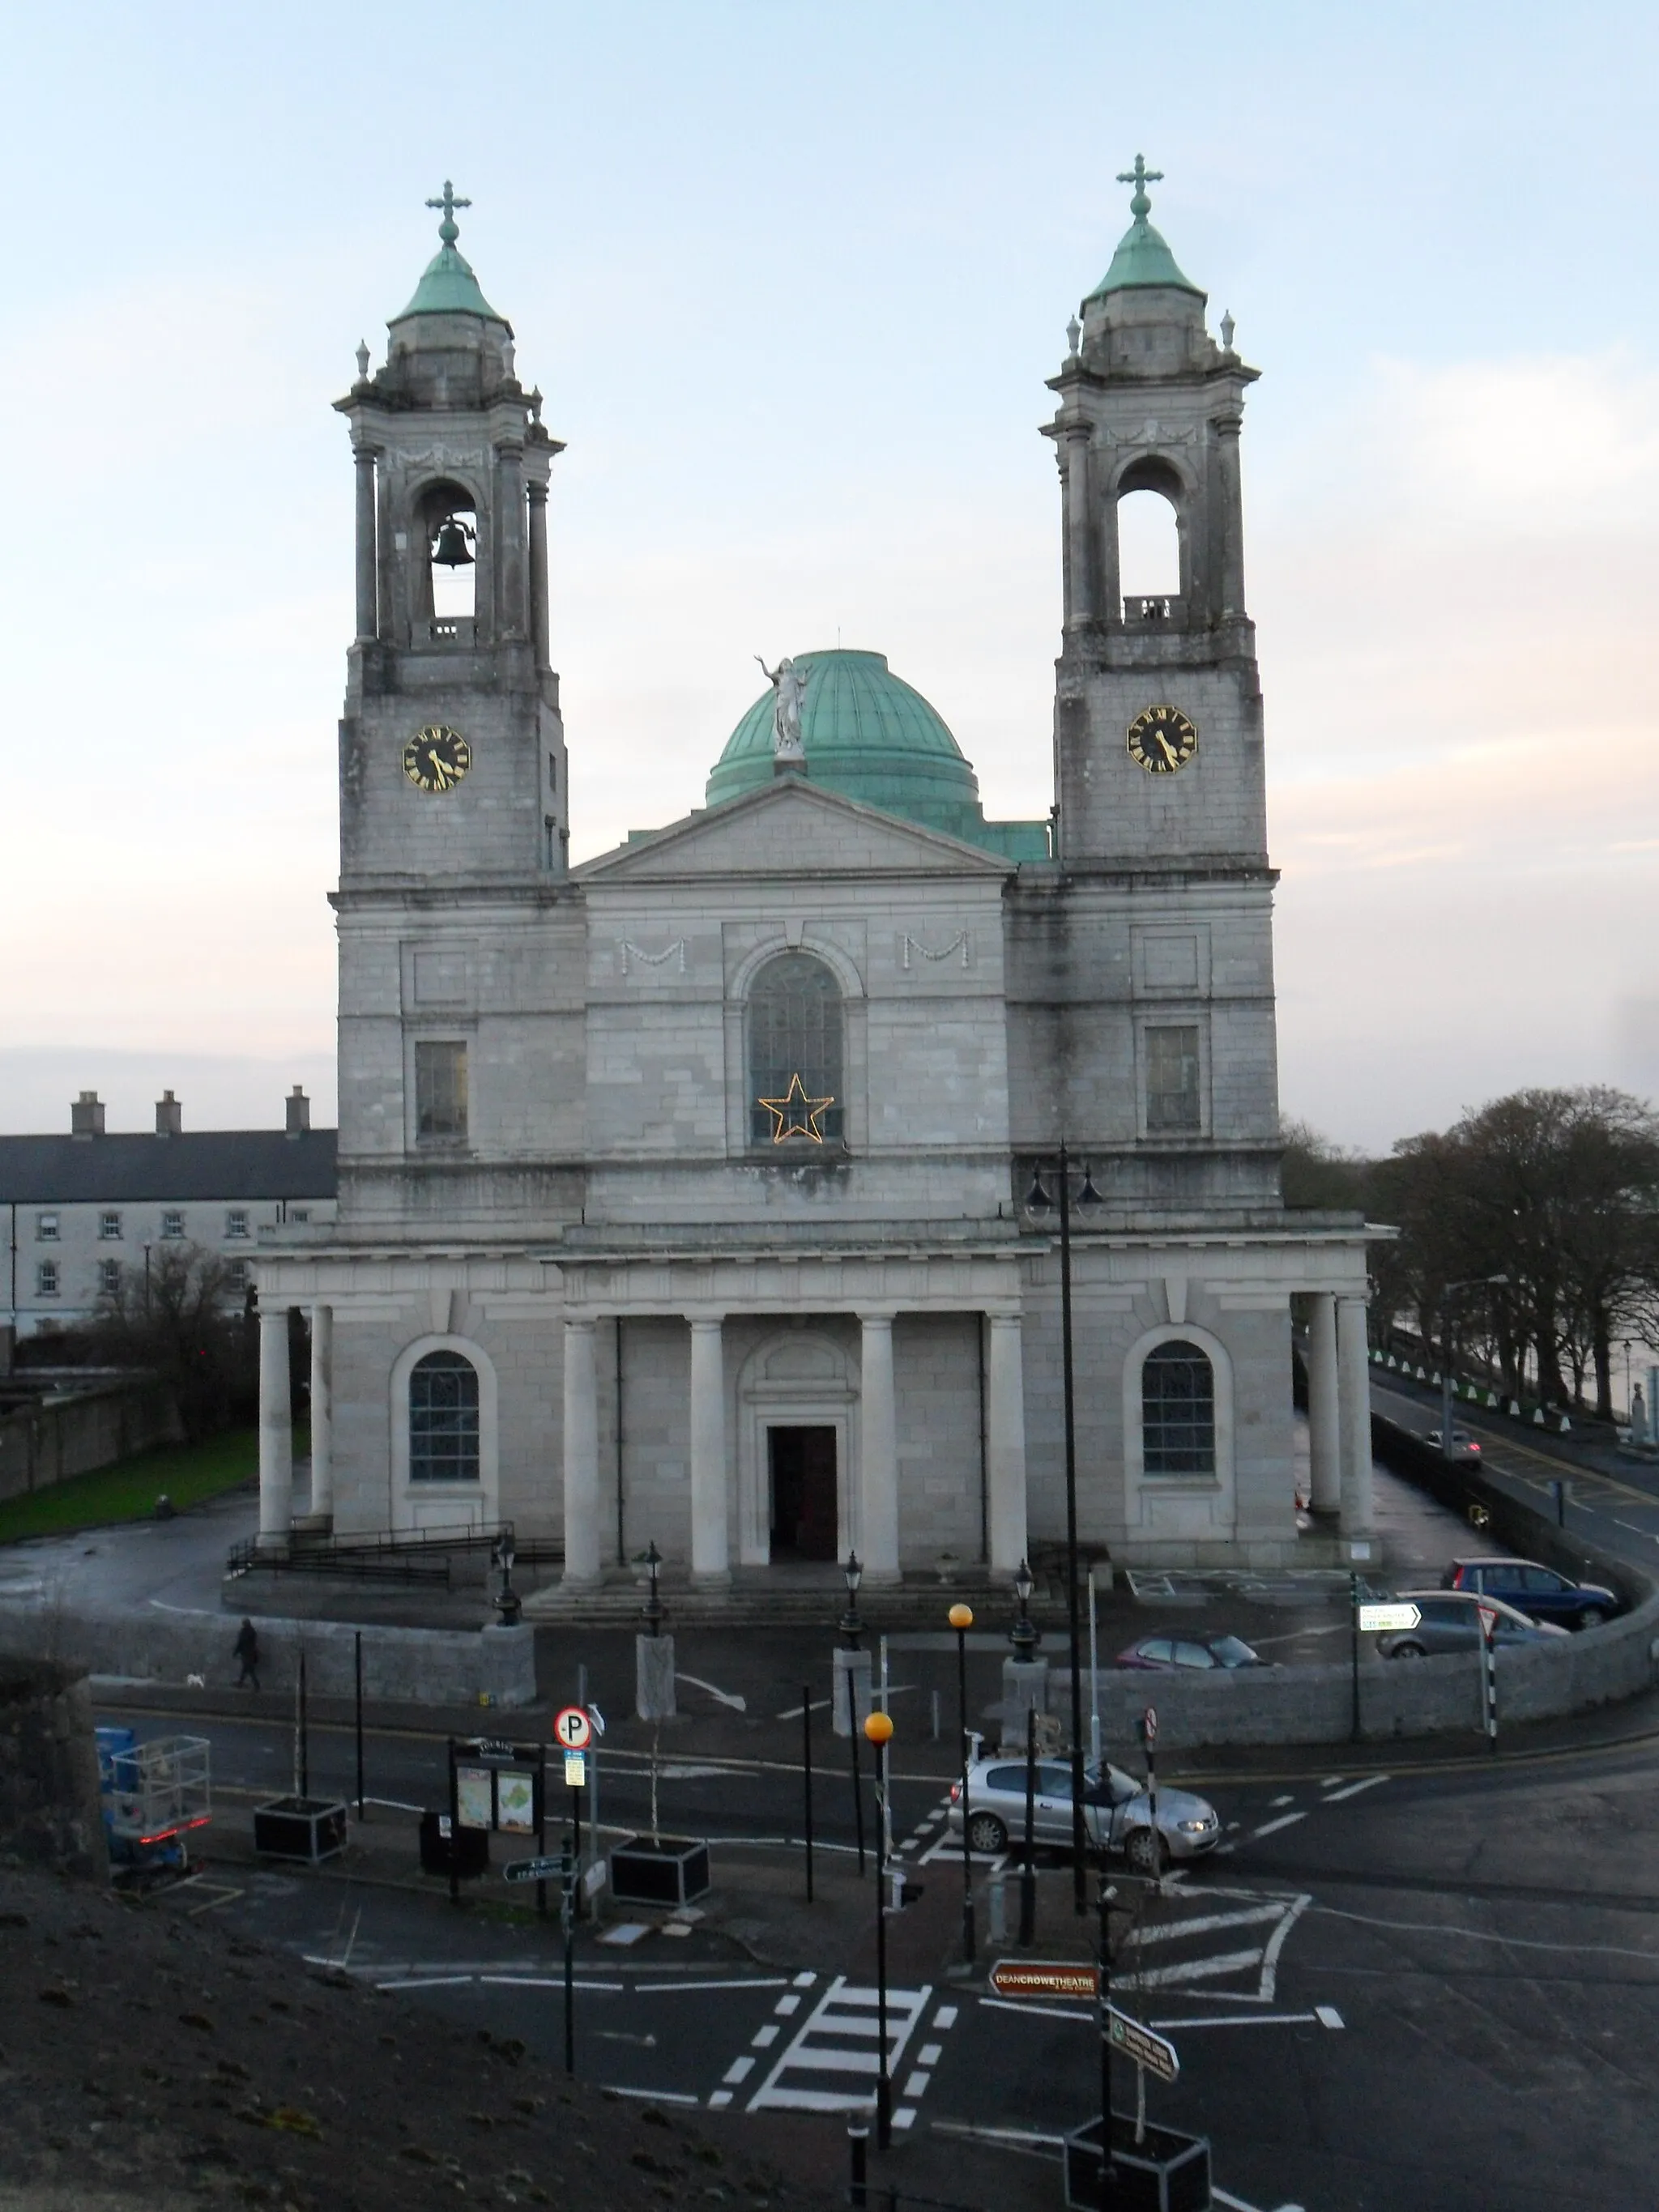 Photo showing: View of the St Peter and Paul Church in Athlone, Co. Westmeath, Ireland